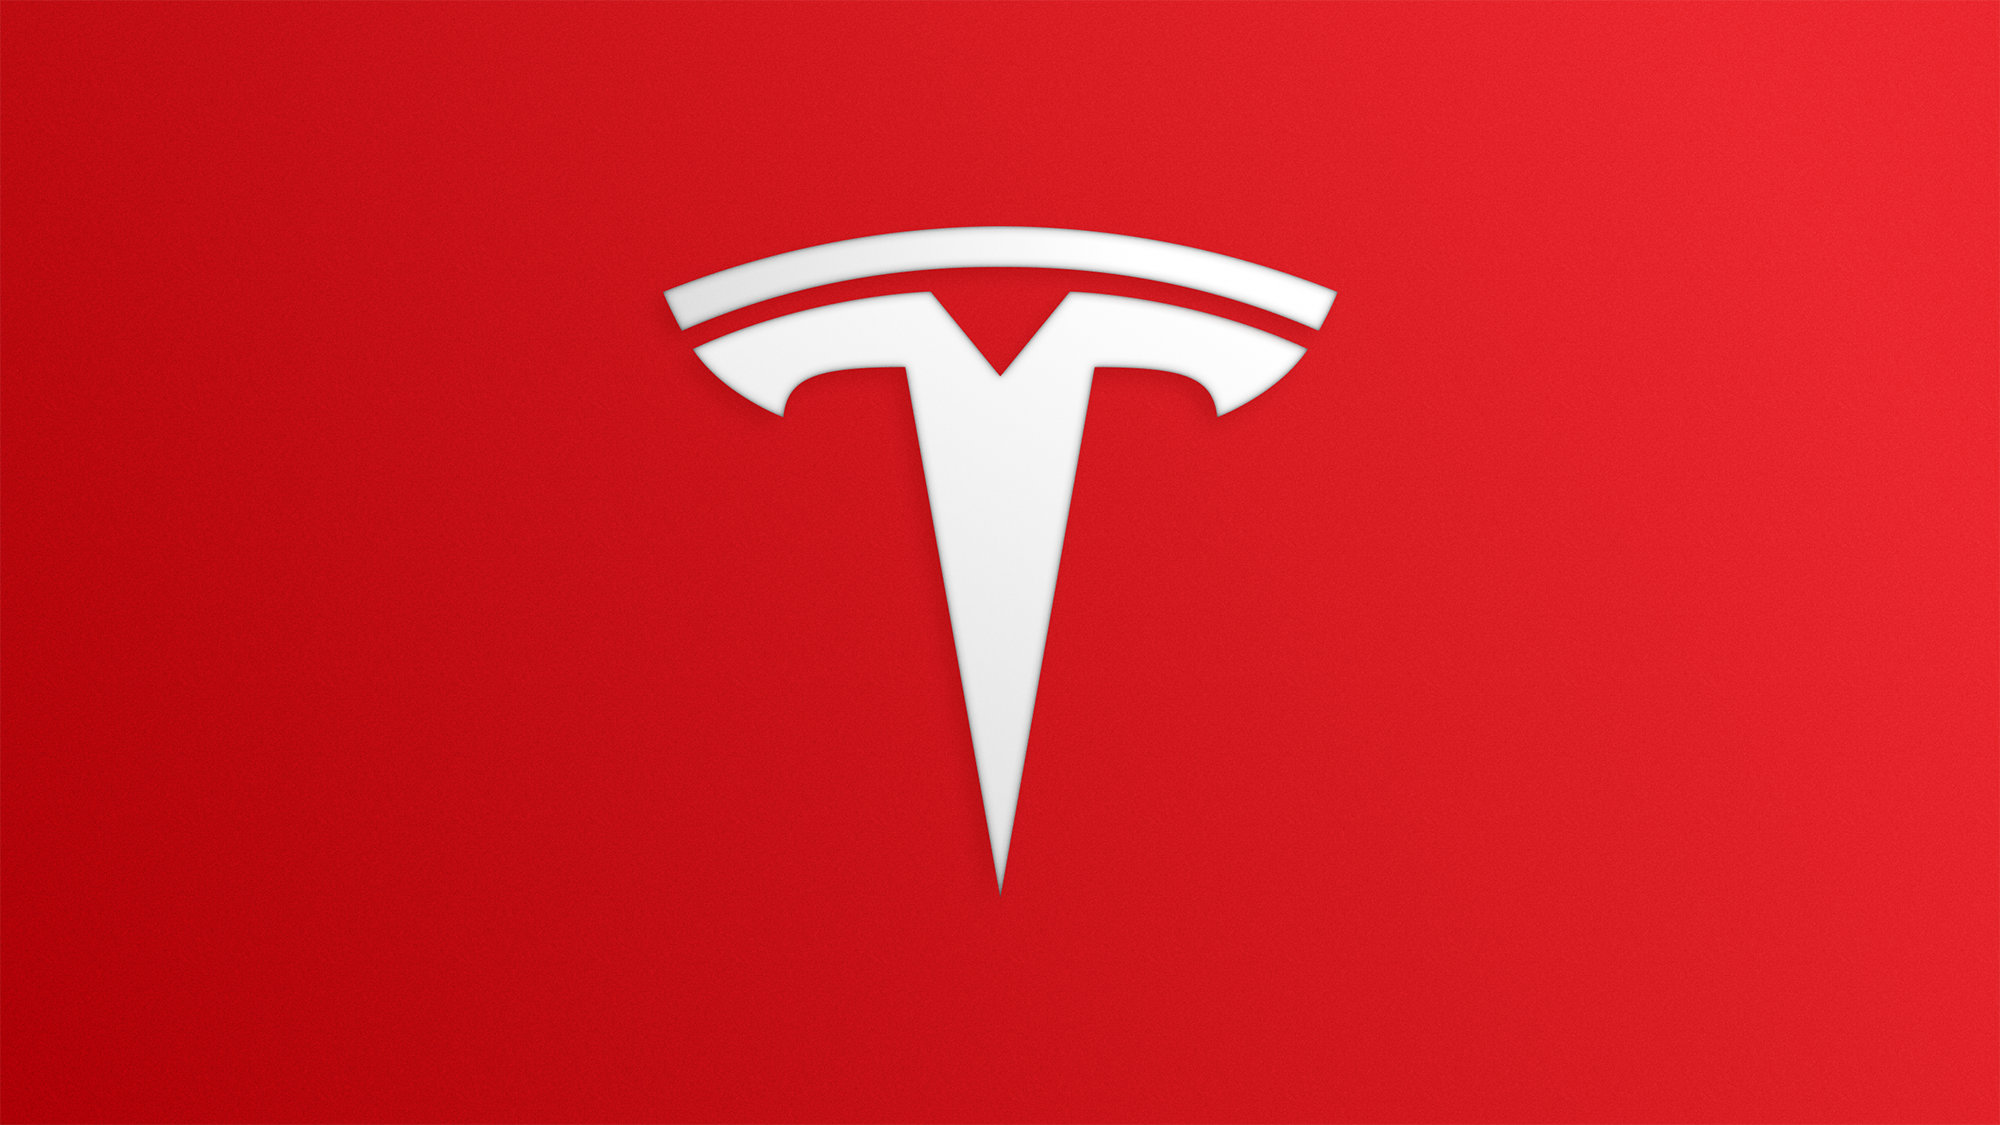 The iconic Tesla logo on a soft red gradient background